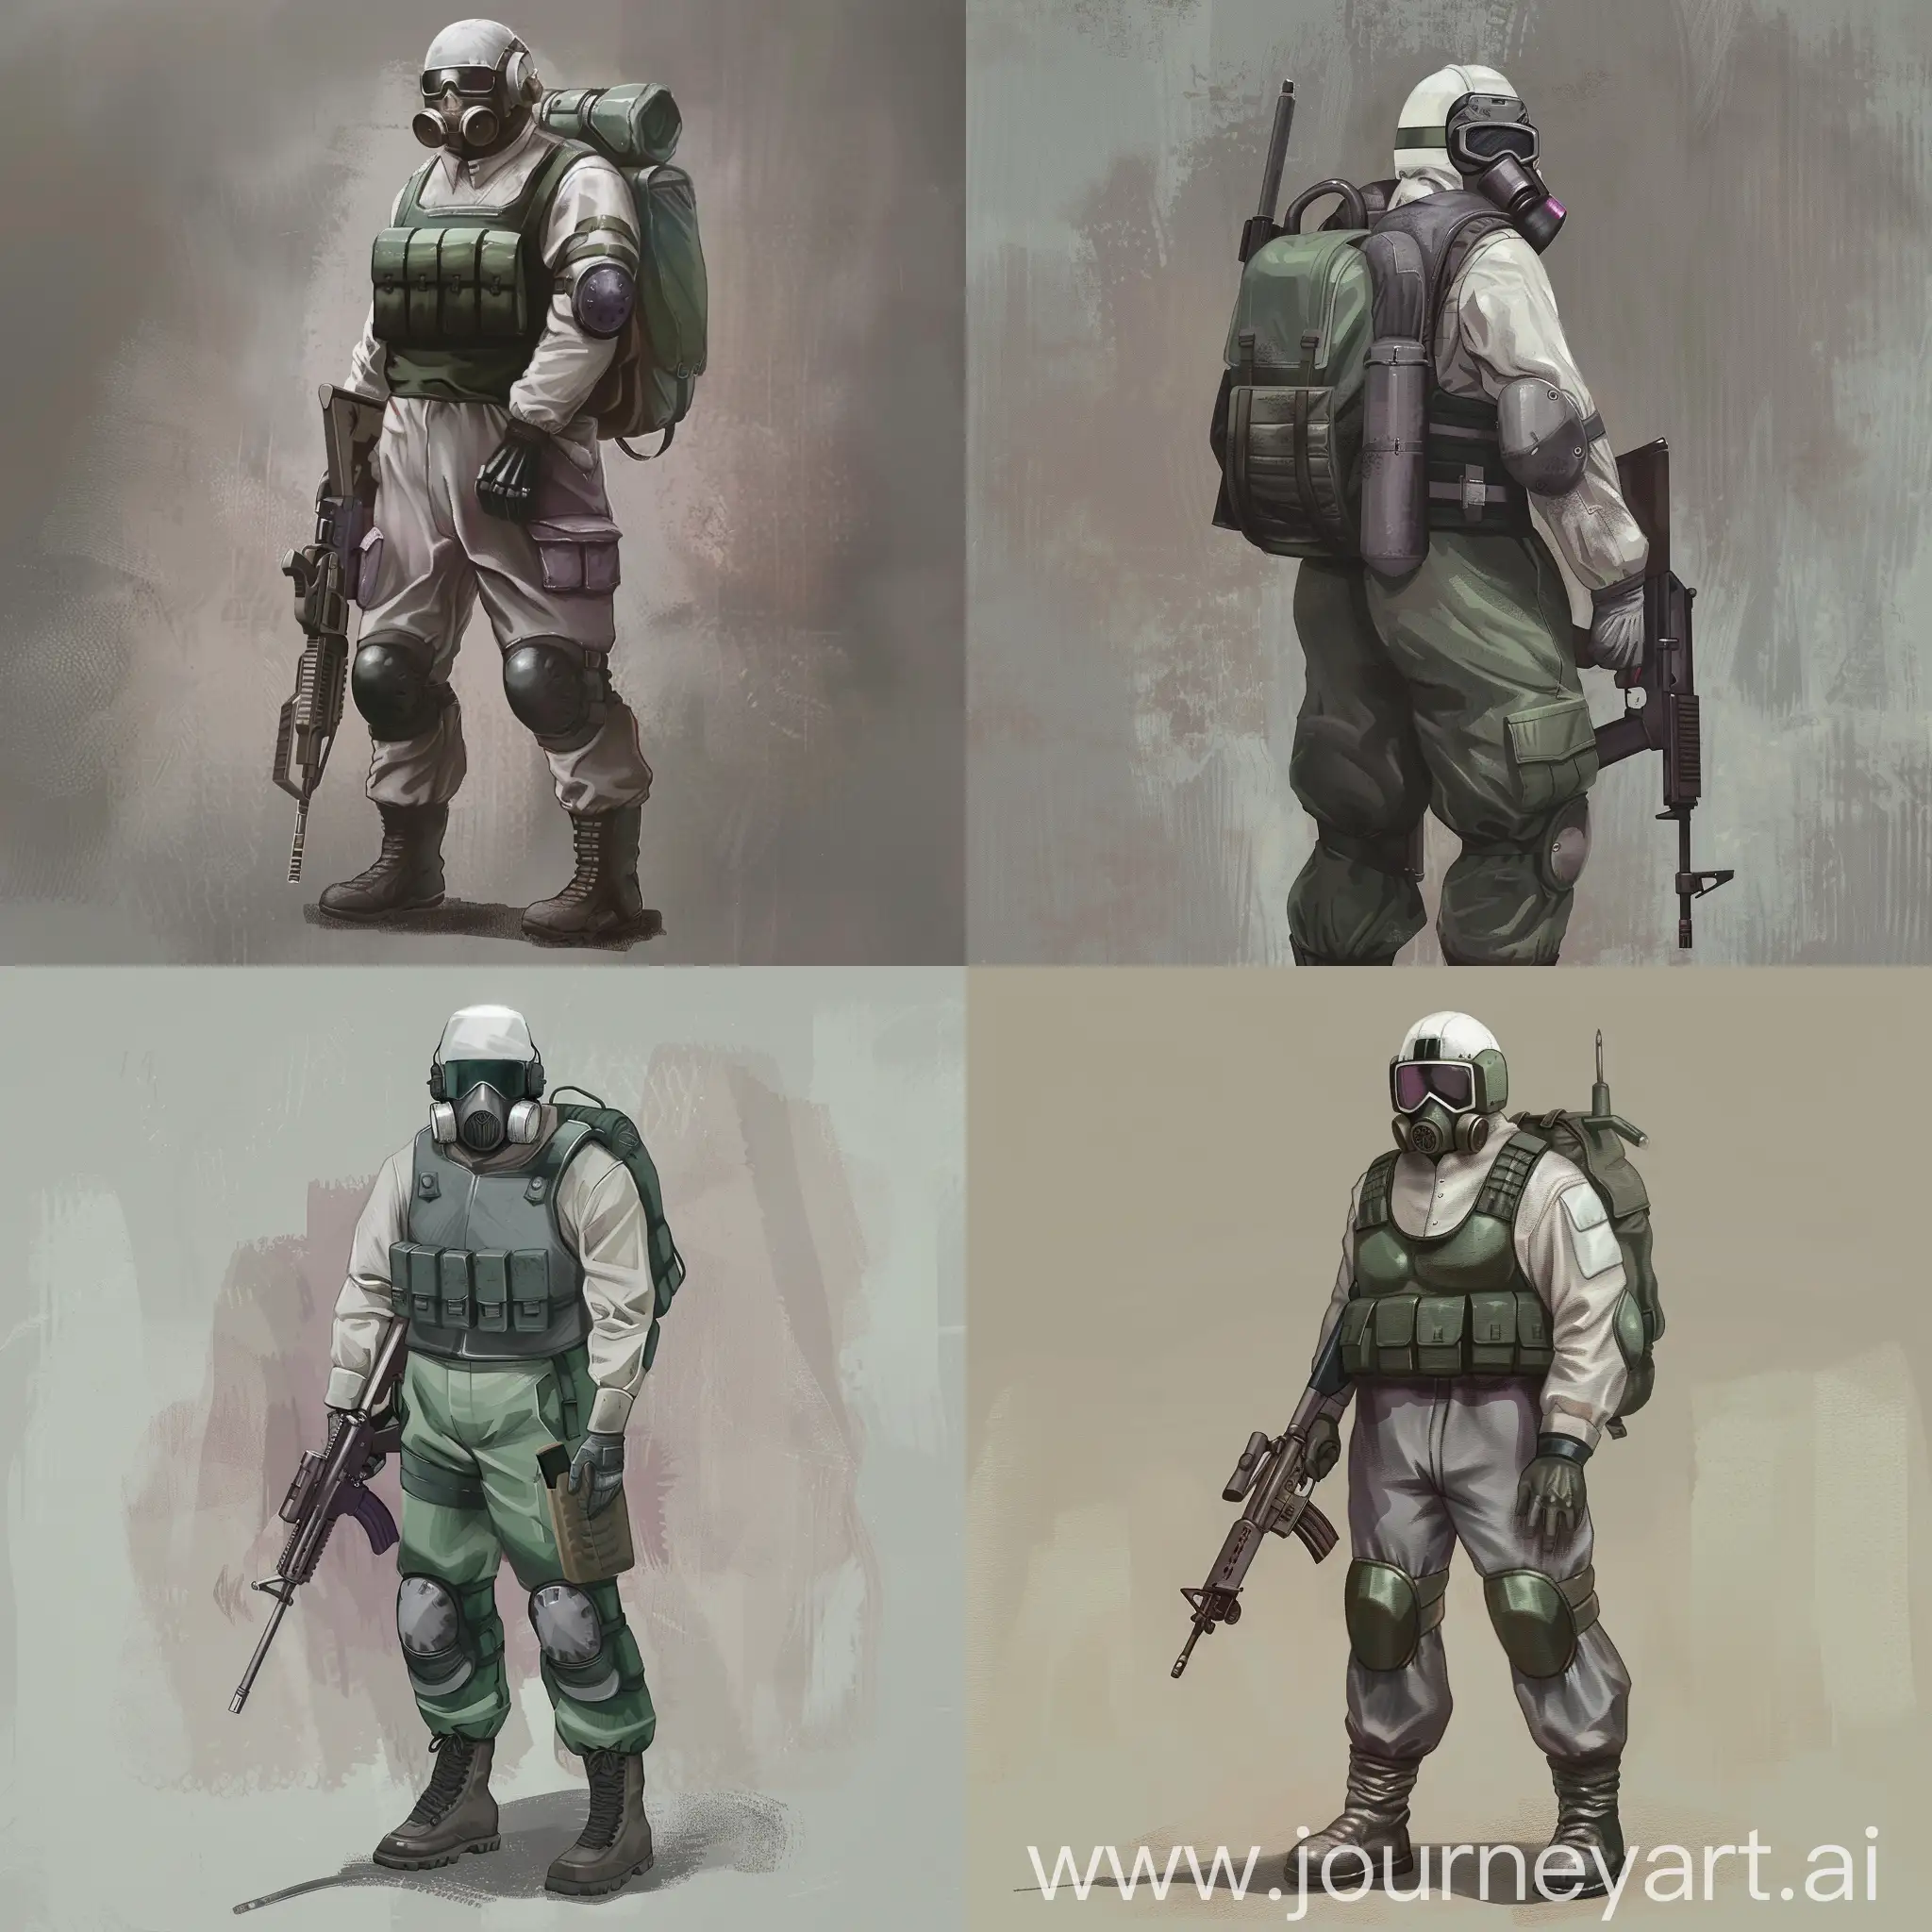 Digital concept art of a mercenary from the universe of S.T.A.L.K.E.R., dressed in a military jumpsuit, gray military armor on his body, a gas mask on his face, a backpack on the back, a rifle in the hands of a mercenary.